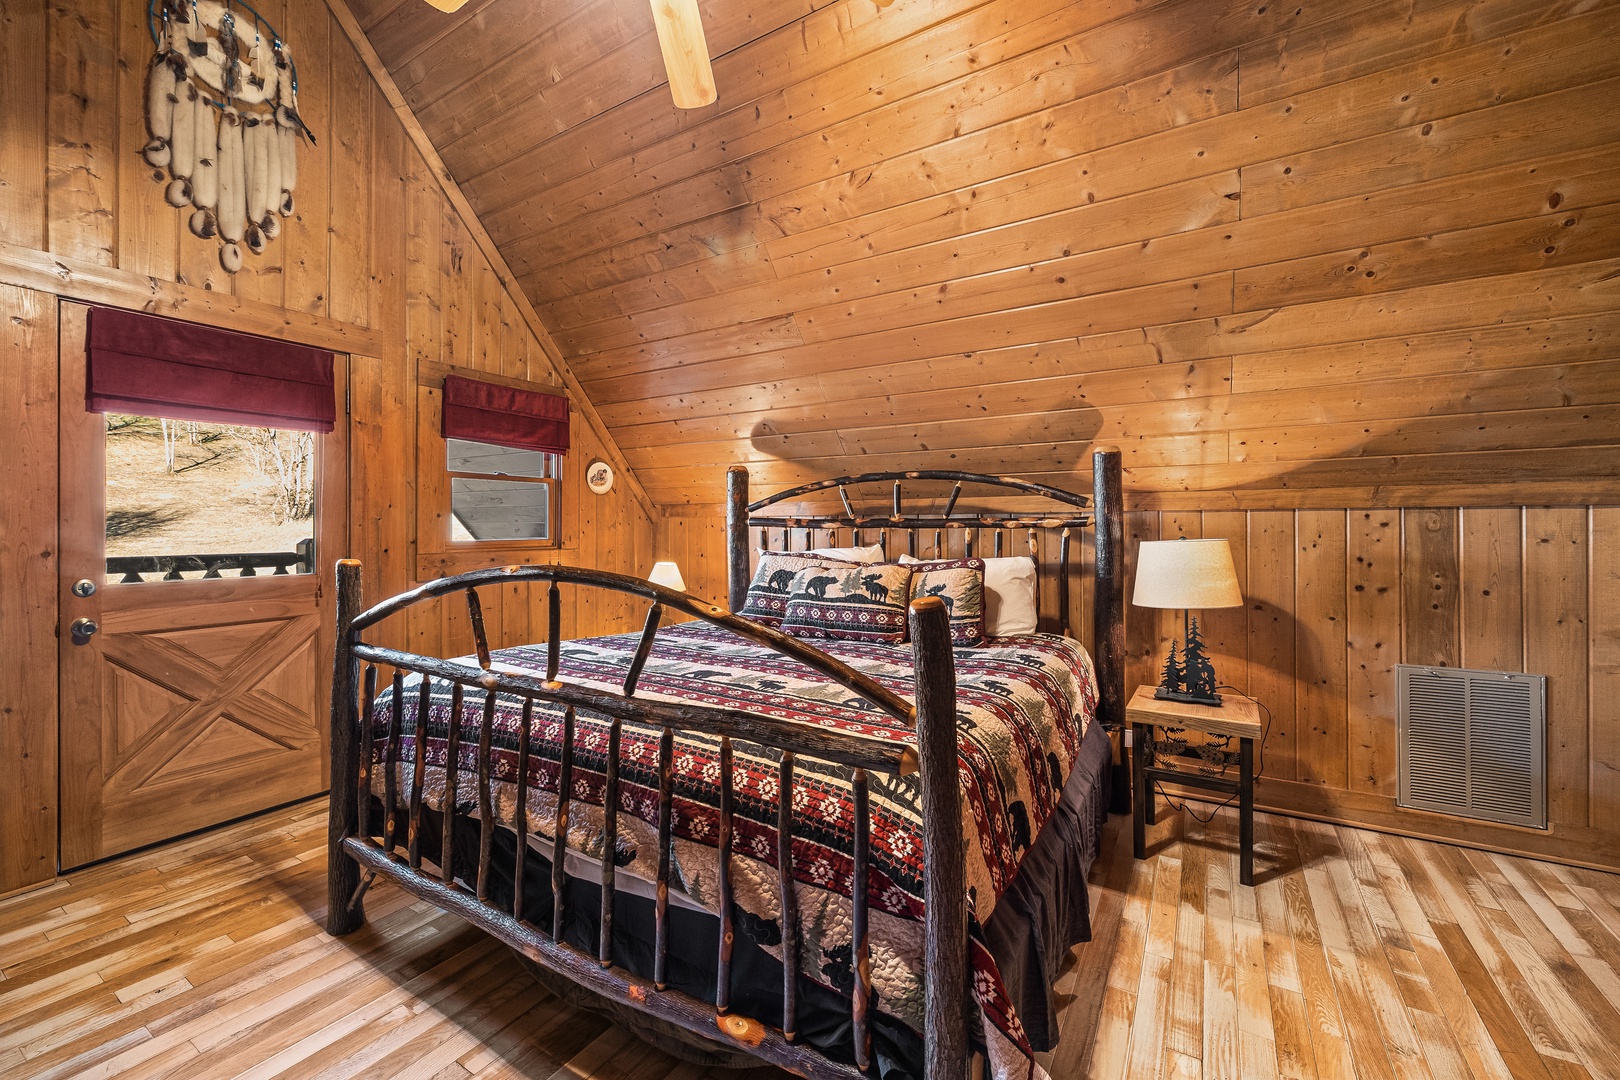 Bedroom with a wooden bed, end tables, and lamps at A Beary Nice Cabin, a 2 bedroom cabin rental located in Pigeon Forge